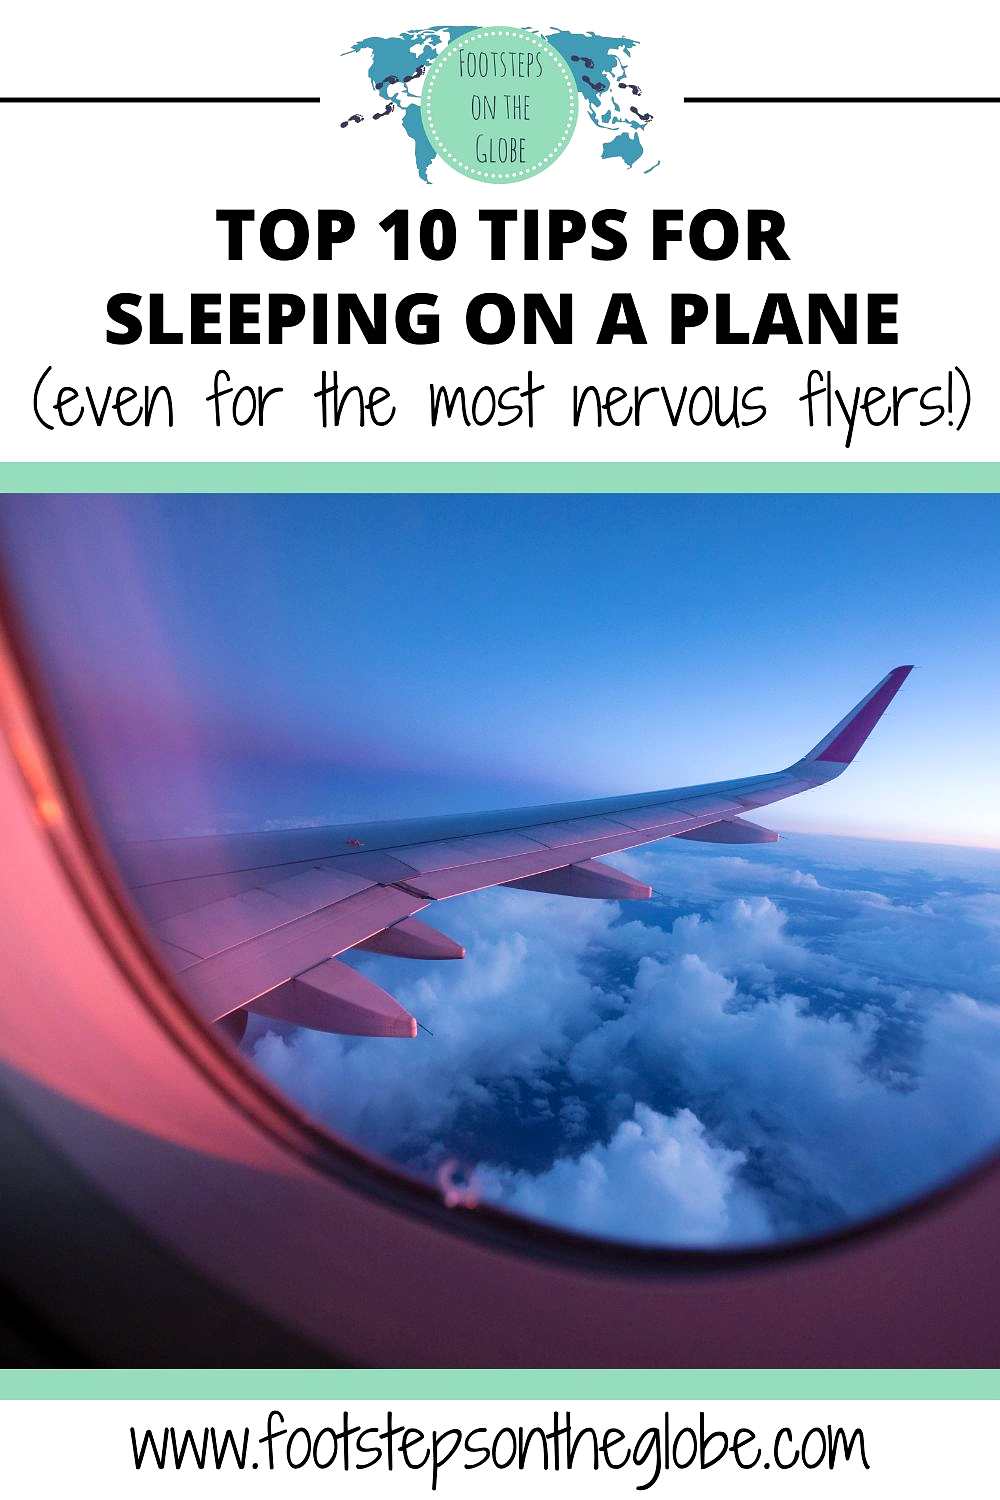 Pinterest image for the blog post "Top 10 tips for sleeping on a plane (even for the most nervous flyers!)" with the image of a plane window showing a plane wing at sunset amongst the clouds